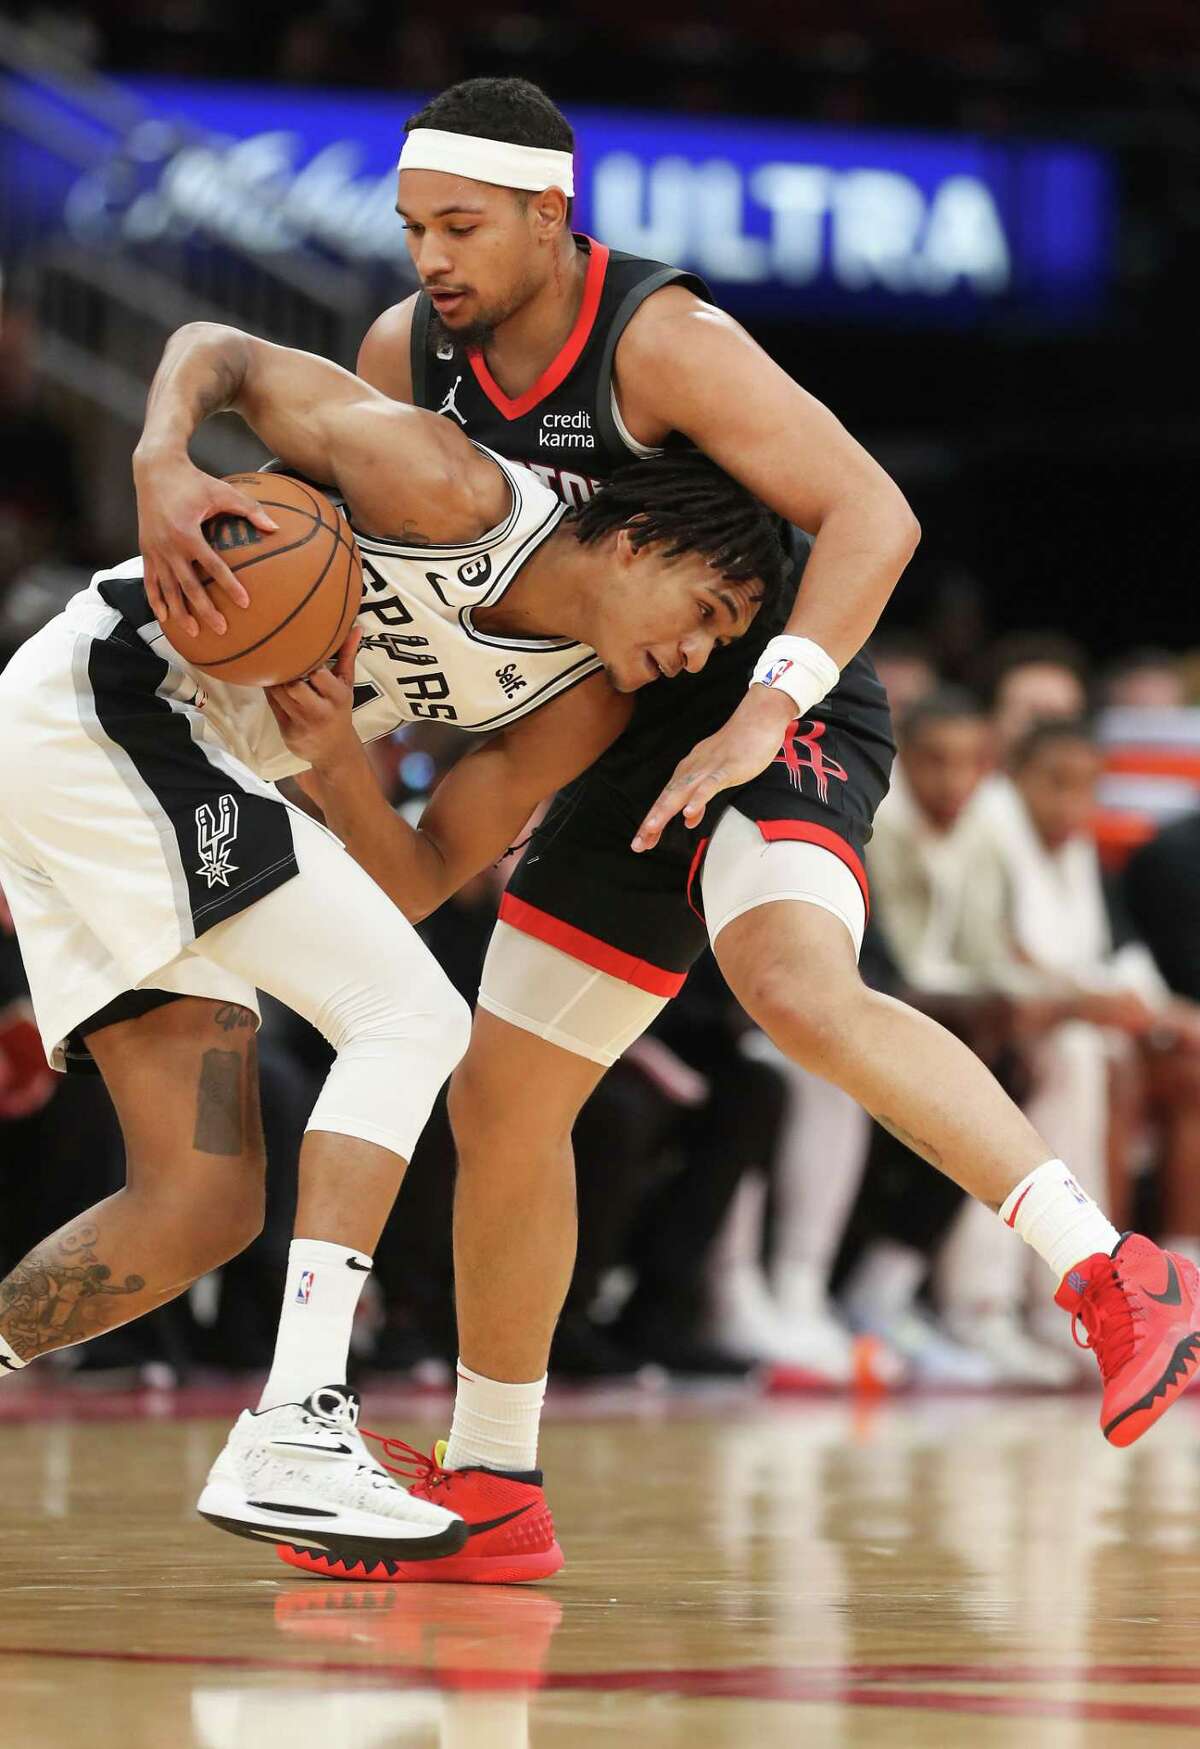 San Antonio Spurs guard Devin Vassell (24) drives into Houston Rockets guard Daishen Nix (15) in the first half at the Toyota Center on Monday, Dec. 19, 2022 in Houston.